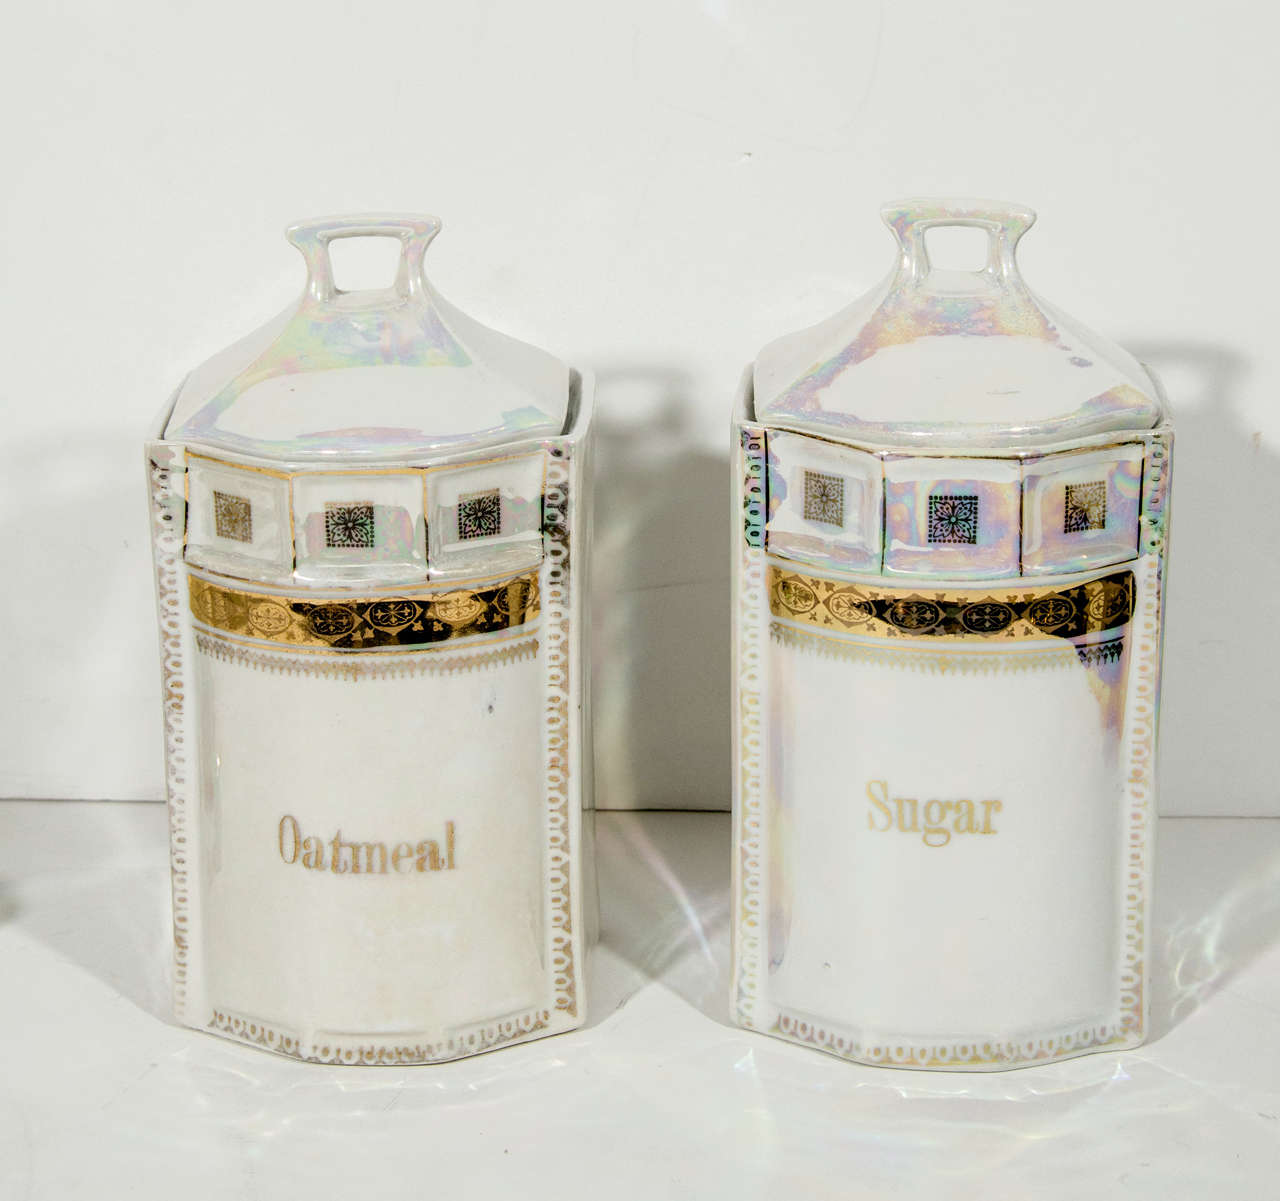 Antique Porcelain Canister Storage Jars and Spice Set 12 Pc., Germany circa 1900 For Sale 1